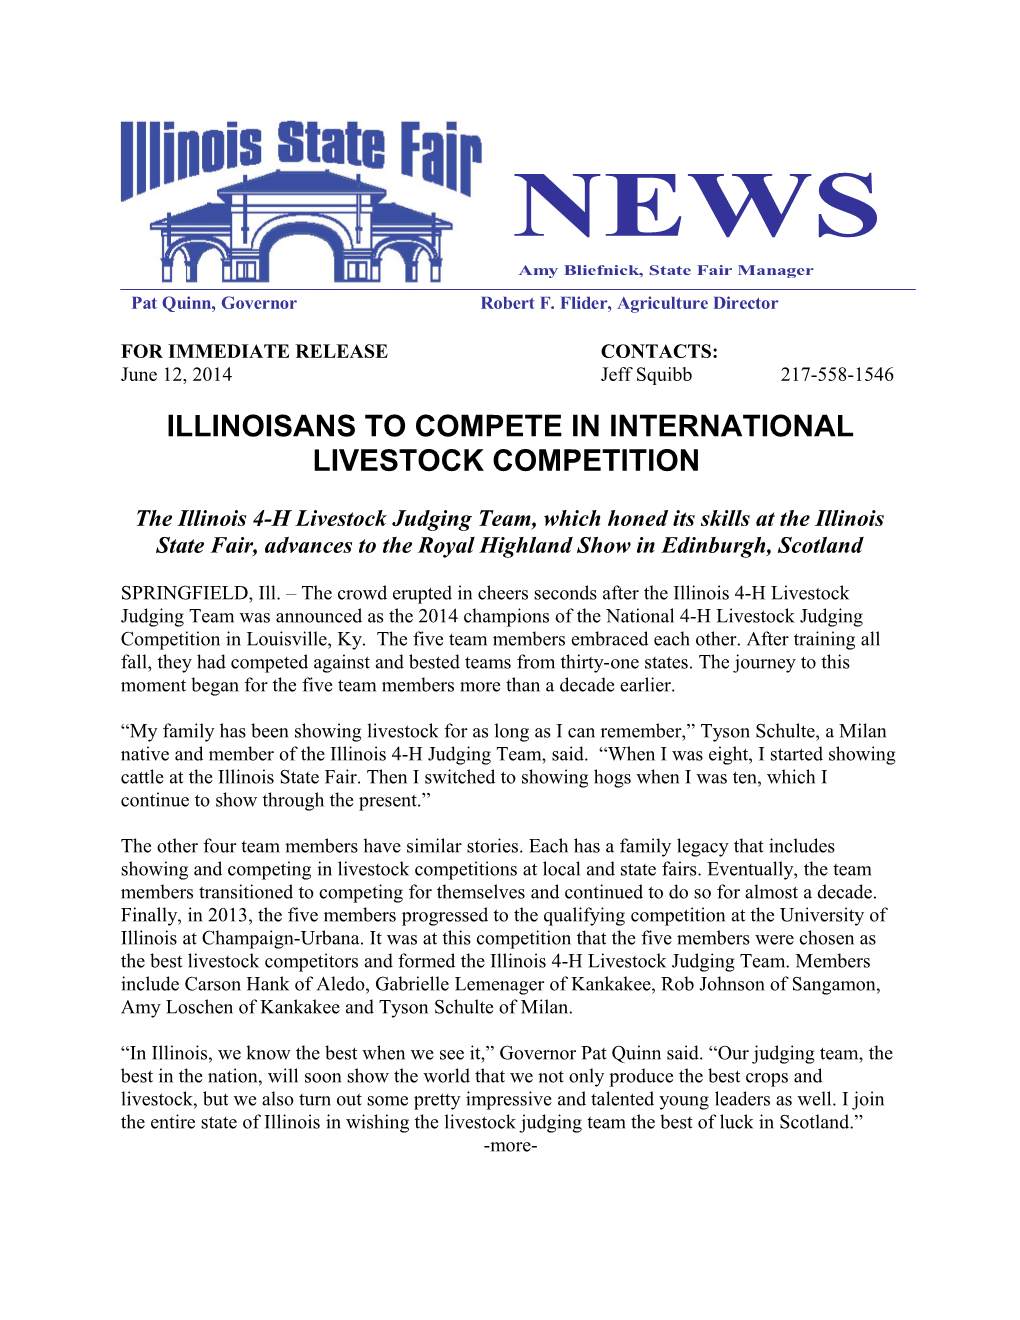 Illinoisans to Compete in International Livestock Competition